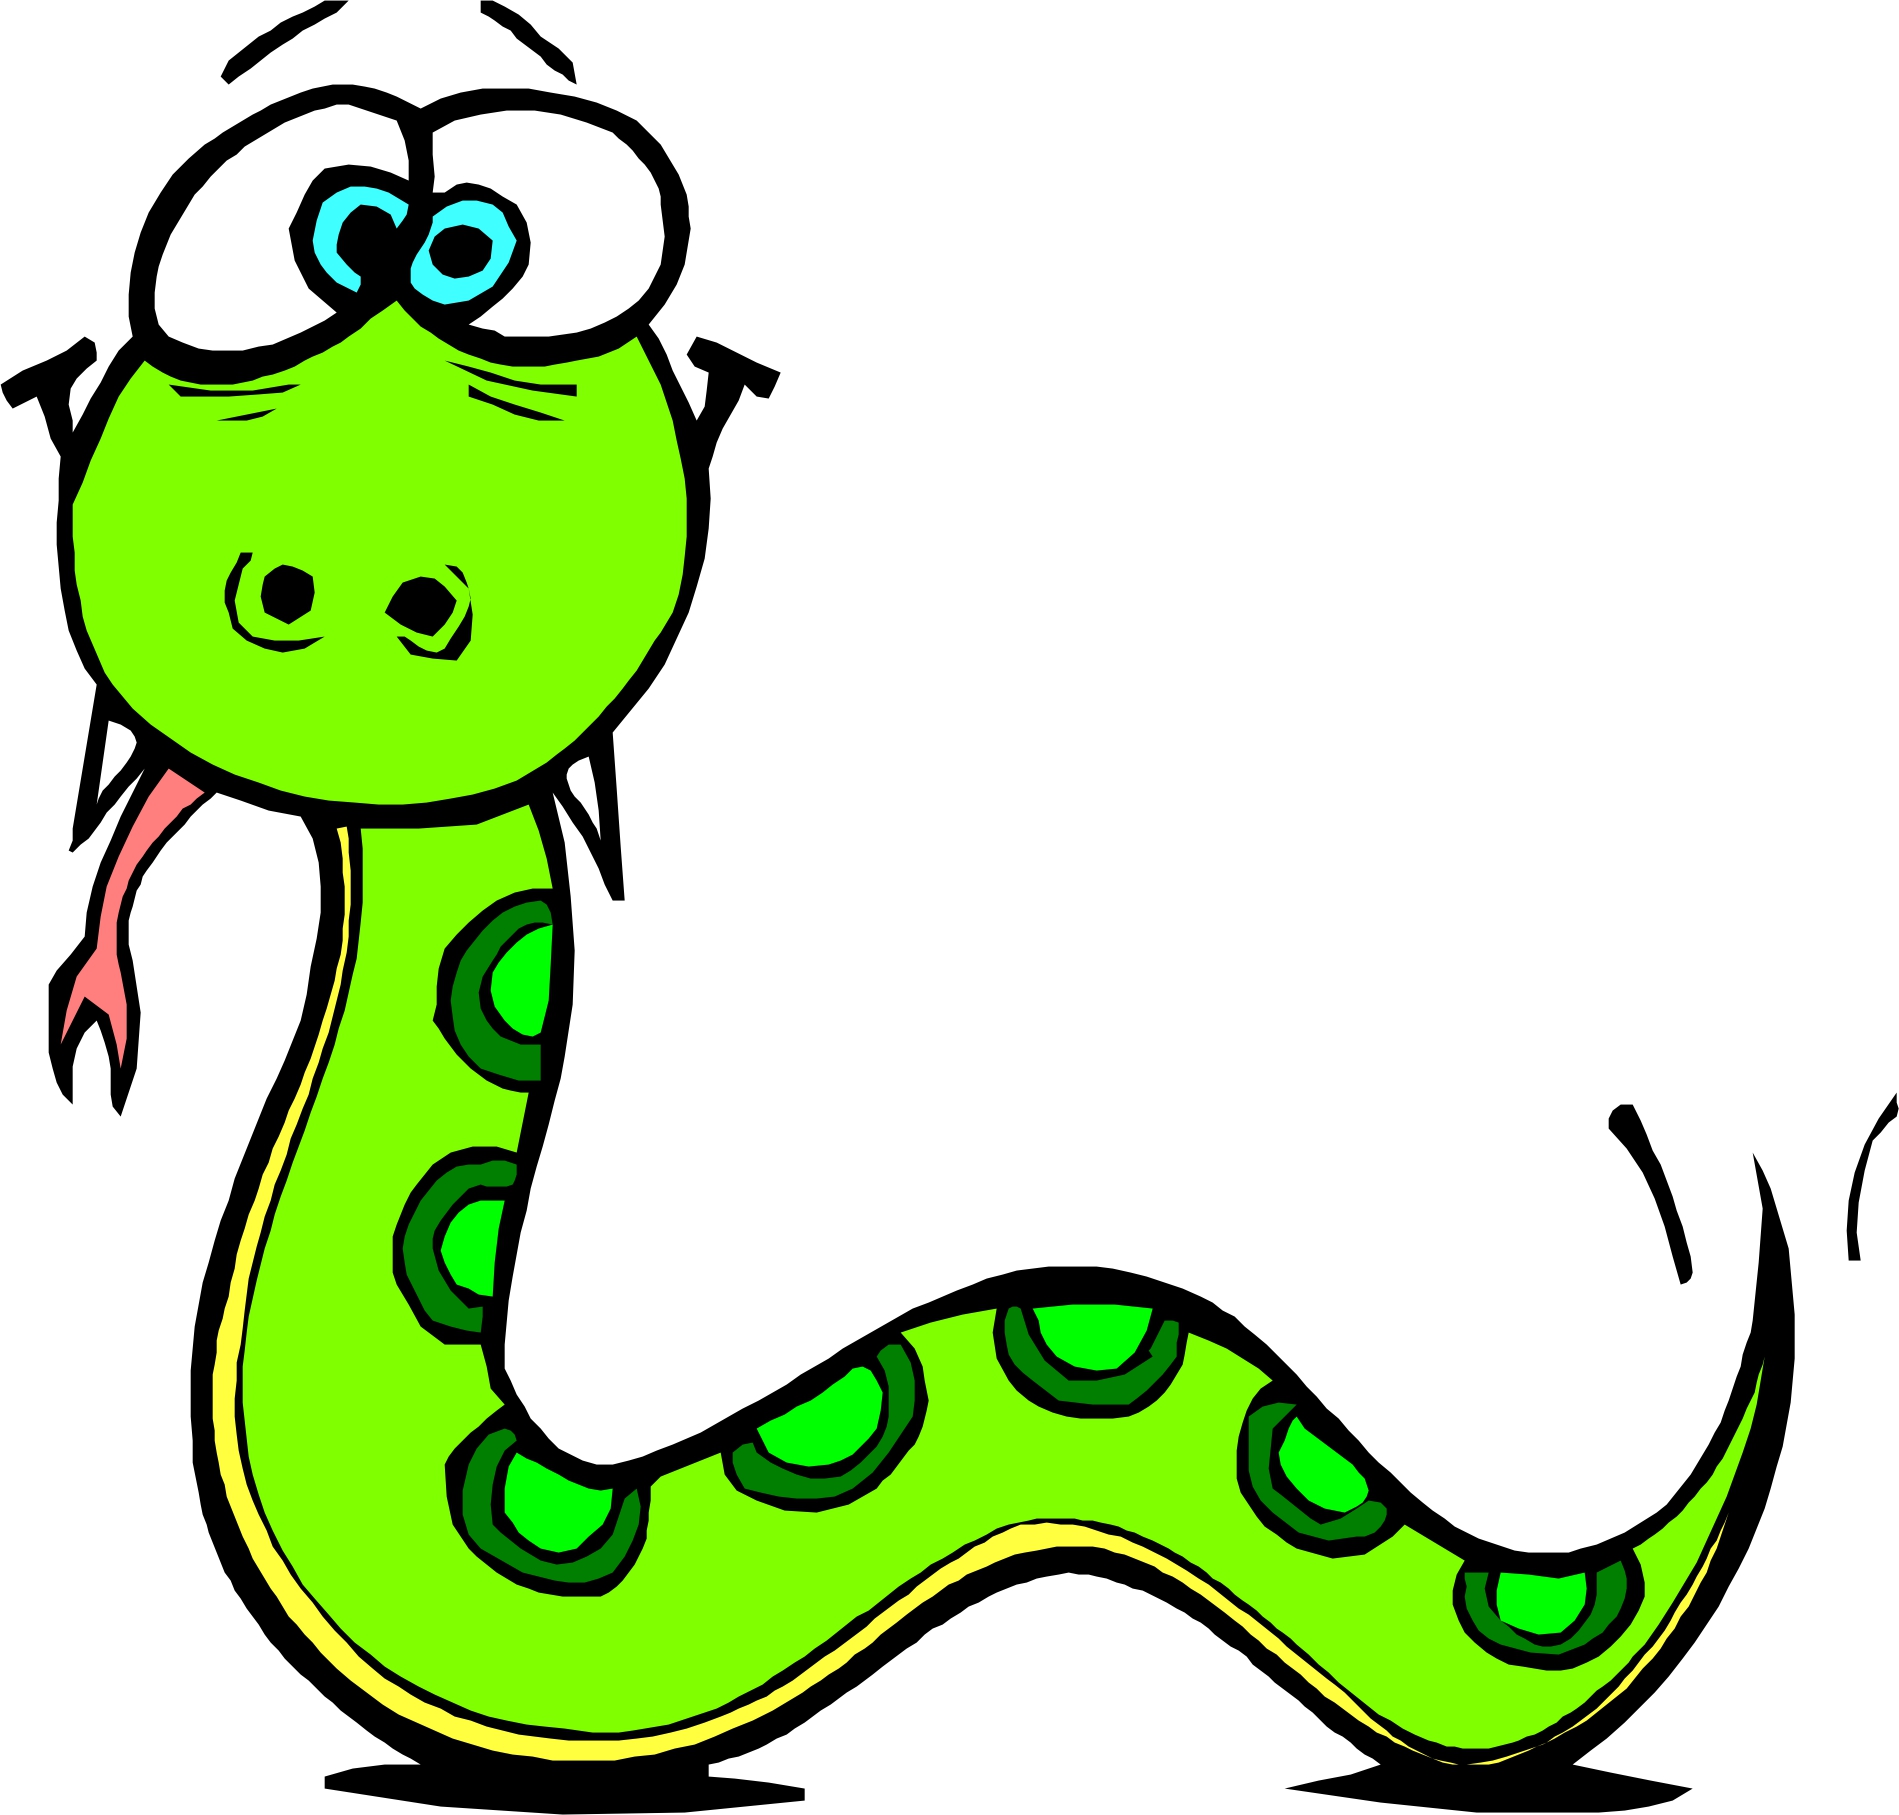 Free Cartoon Snakes Pictures, Download Free Cartoon Snakes Pictures png